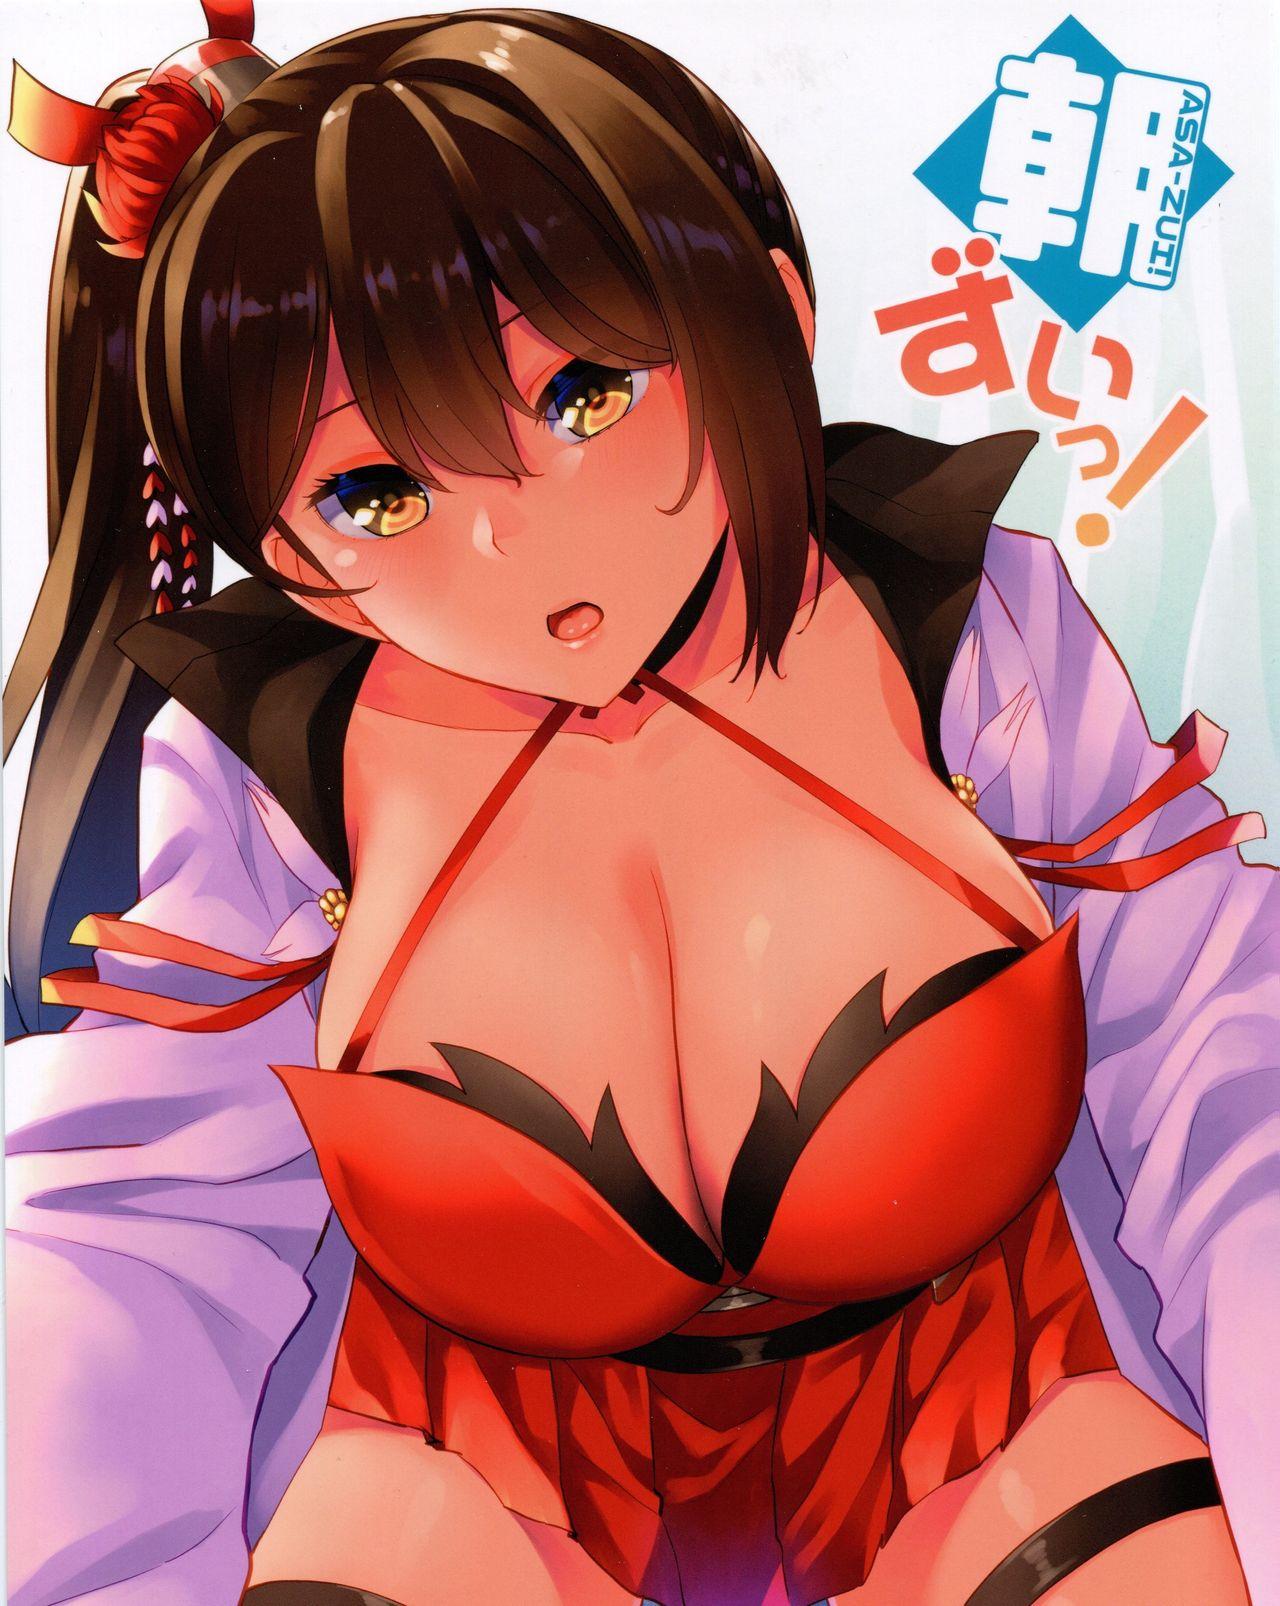 Clothed Asa-Zui! - Azur lane Yanks Featured - Picture 1